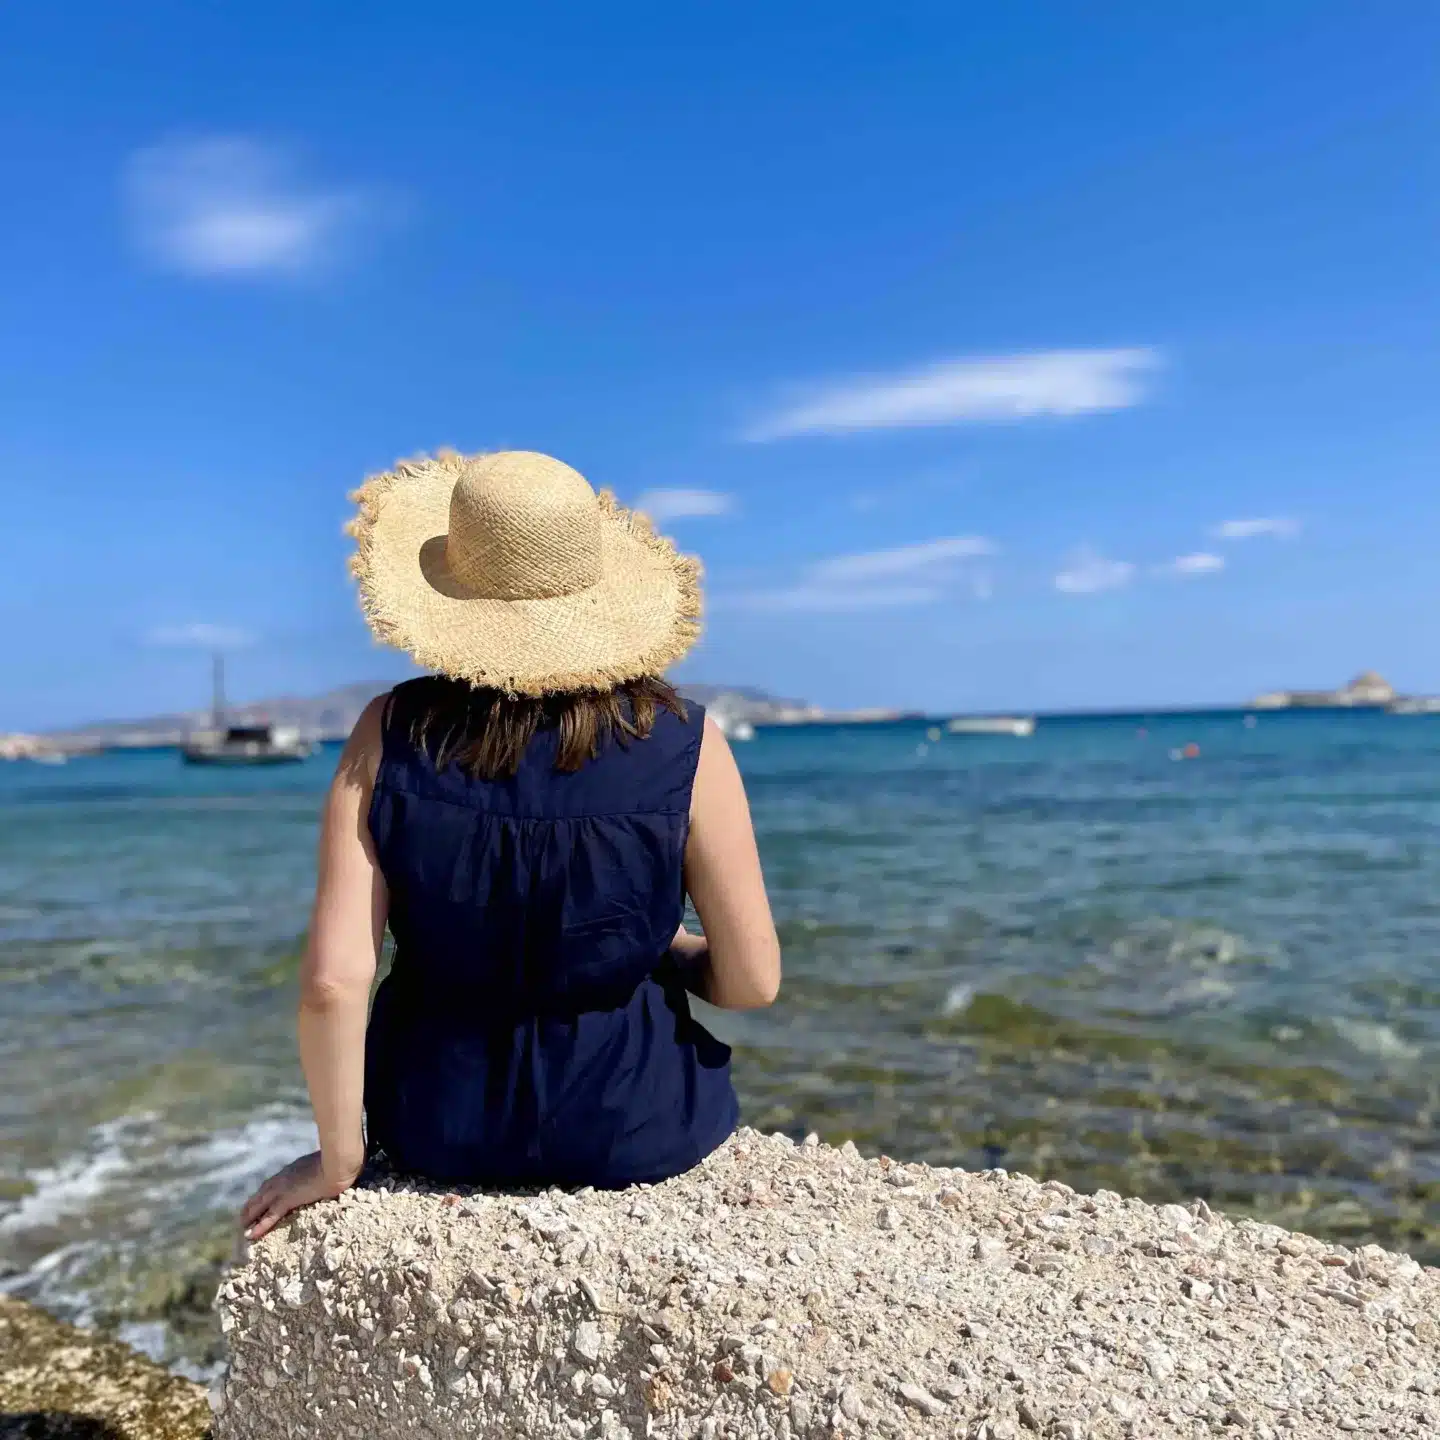 A woman in a blue dress and straw hat sitting on a rock in front of the ocean in Milos.